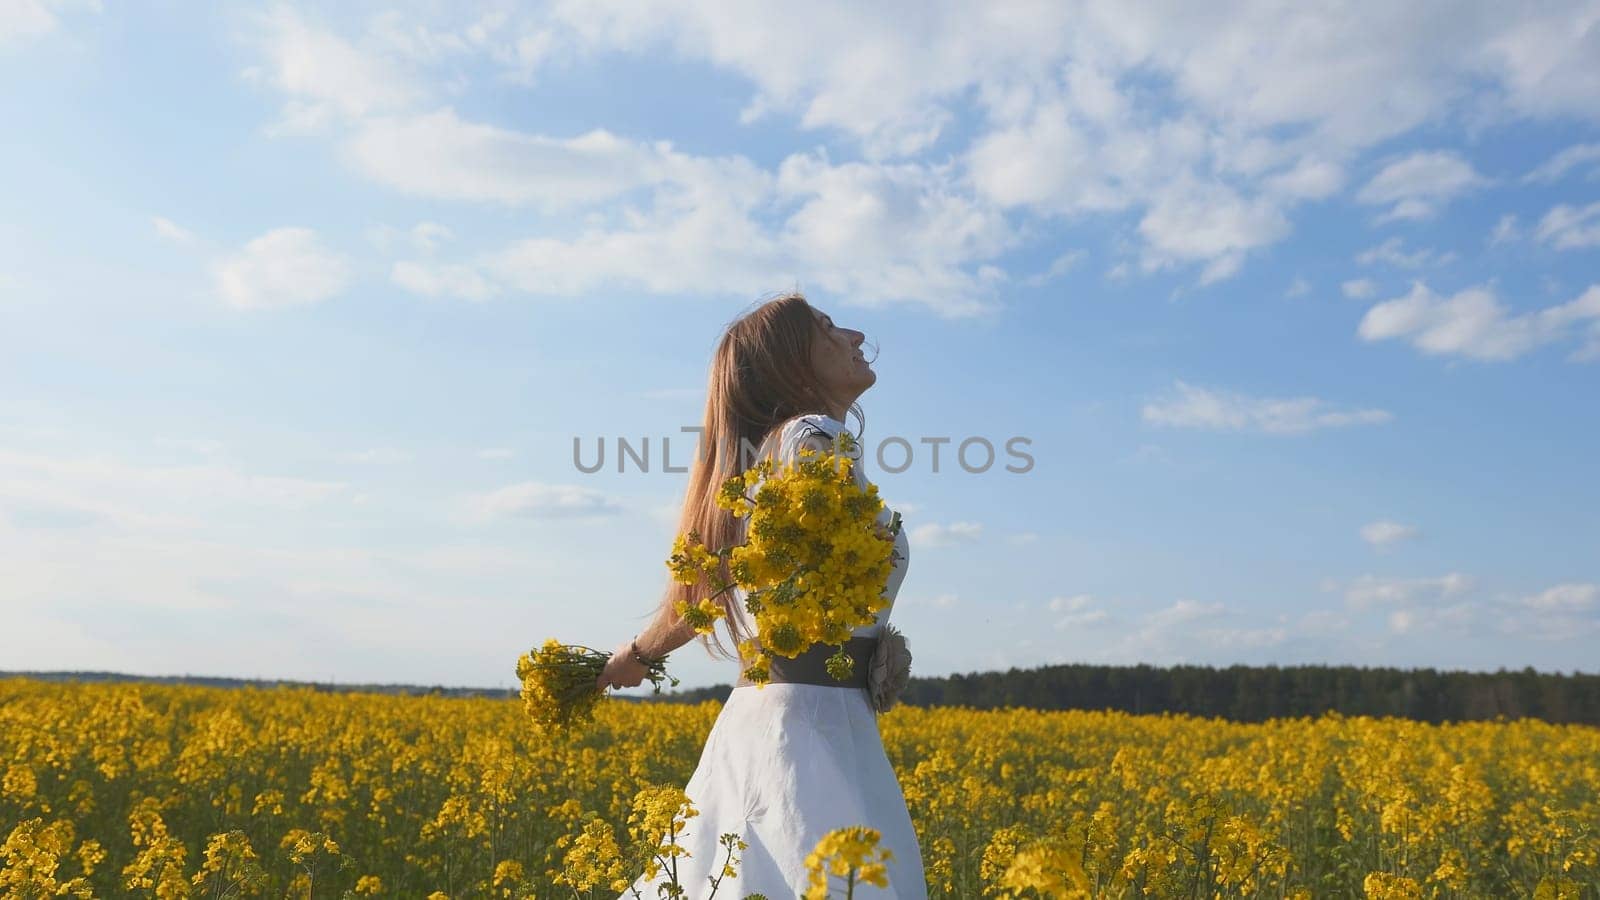 A girl in a white dress is spinning among a rapeseed field